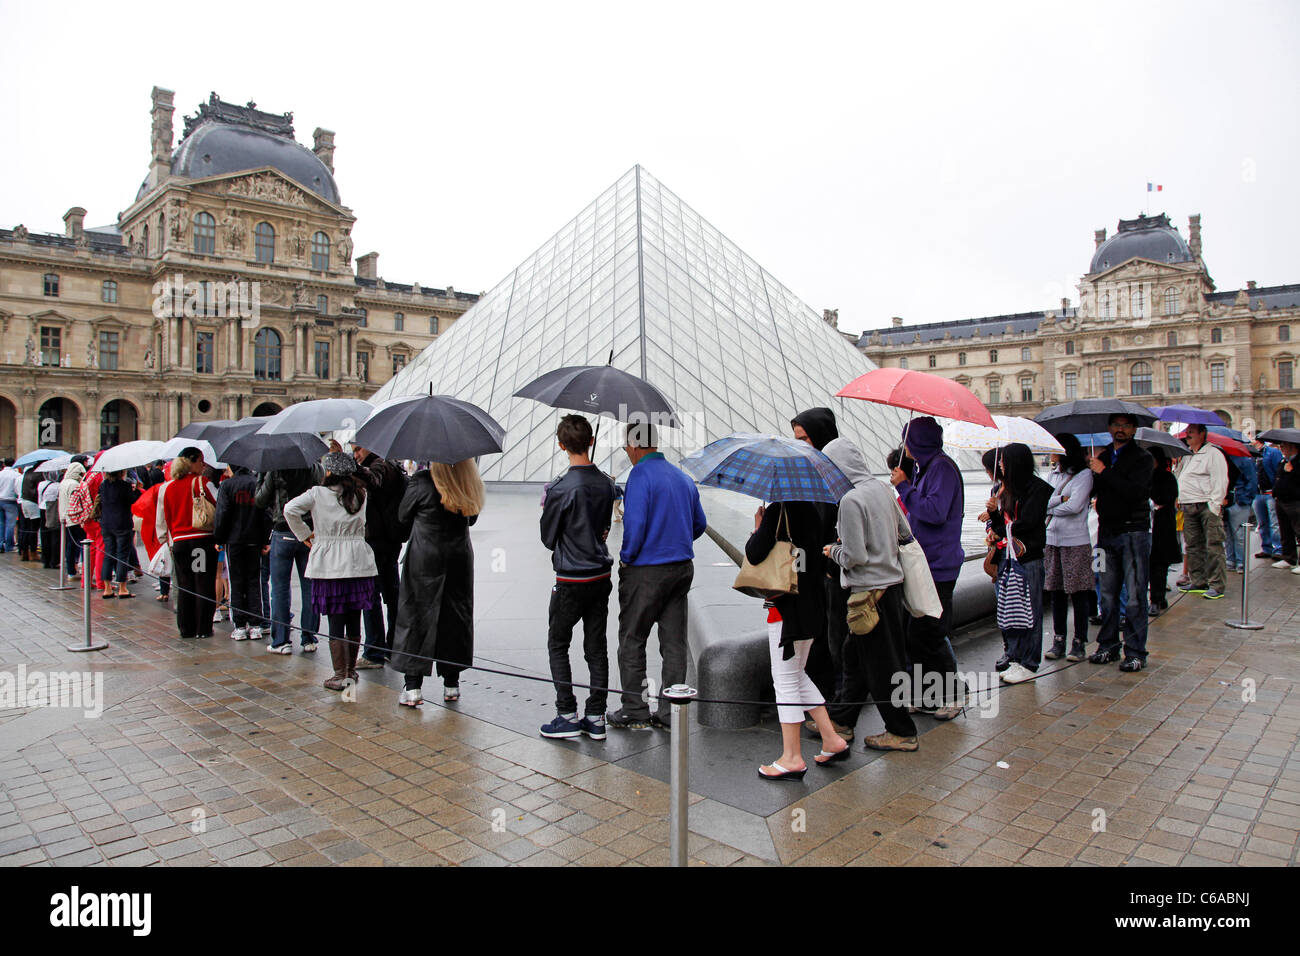 Tourists queuing in the rain at the Louvre Pyramid in Paris, France Stock Photo